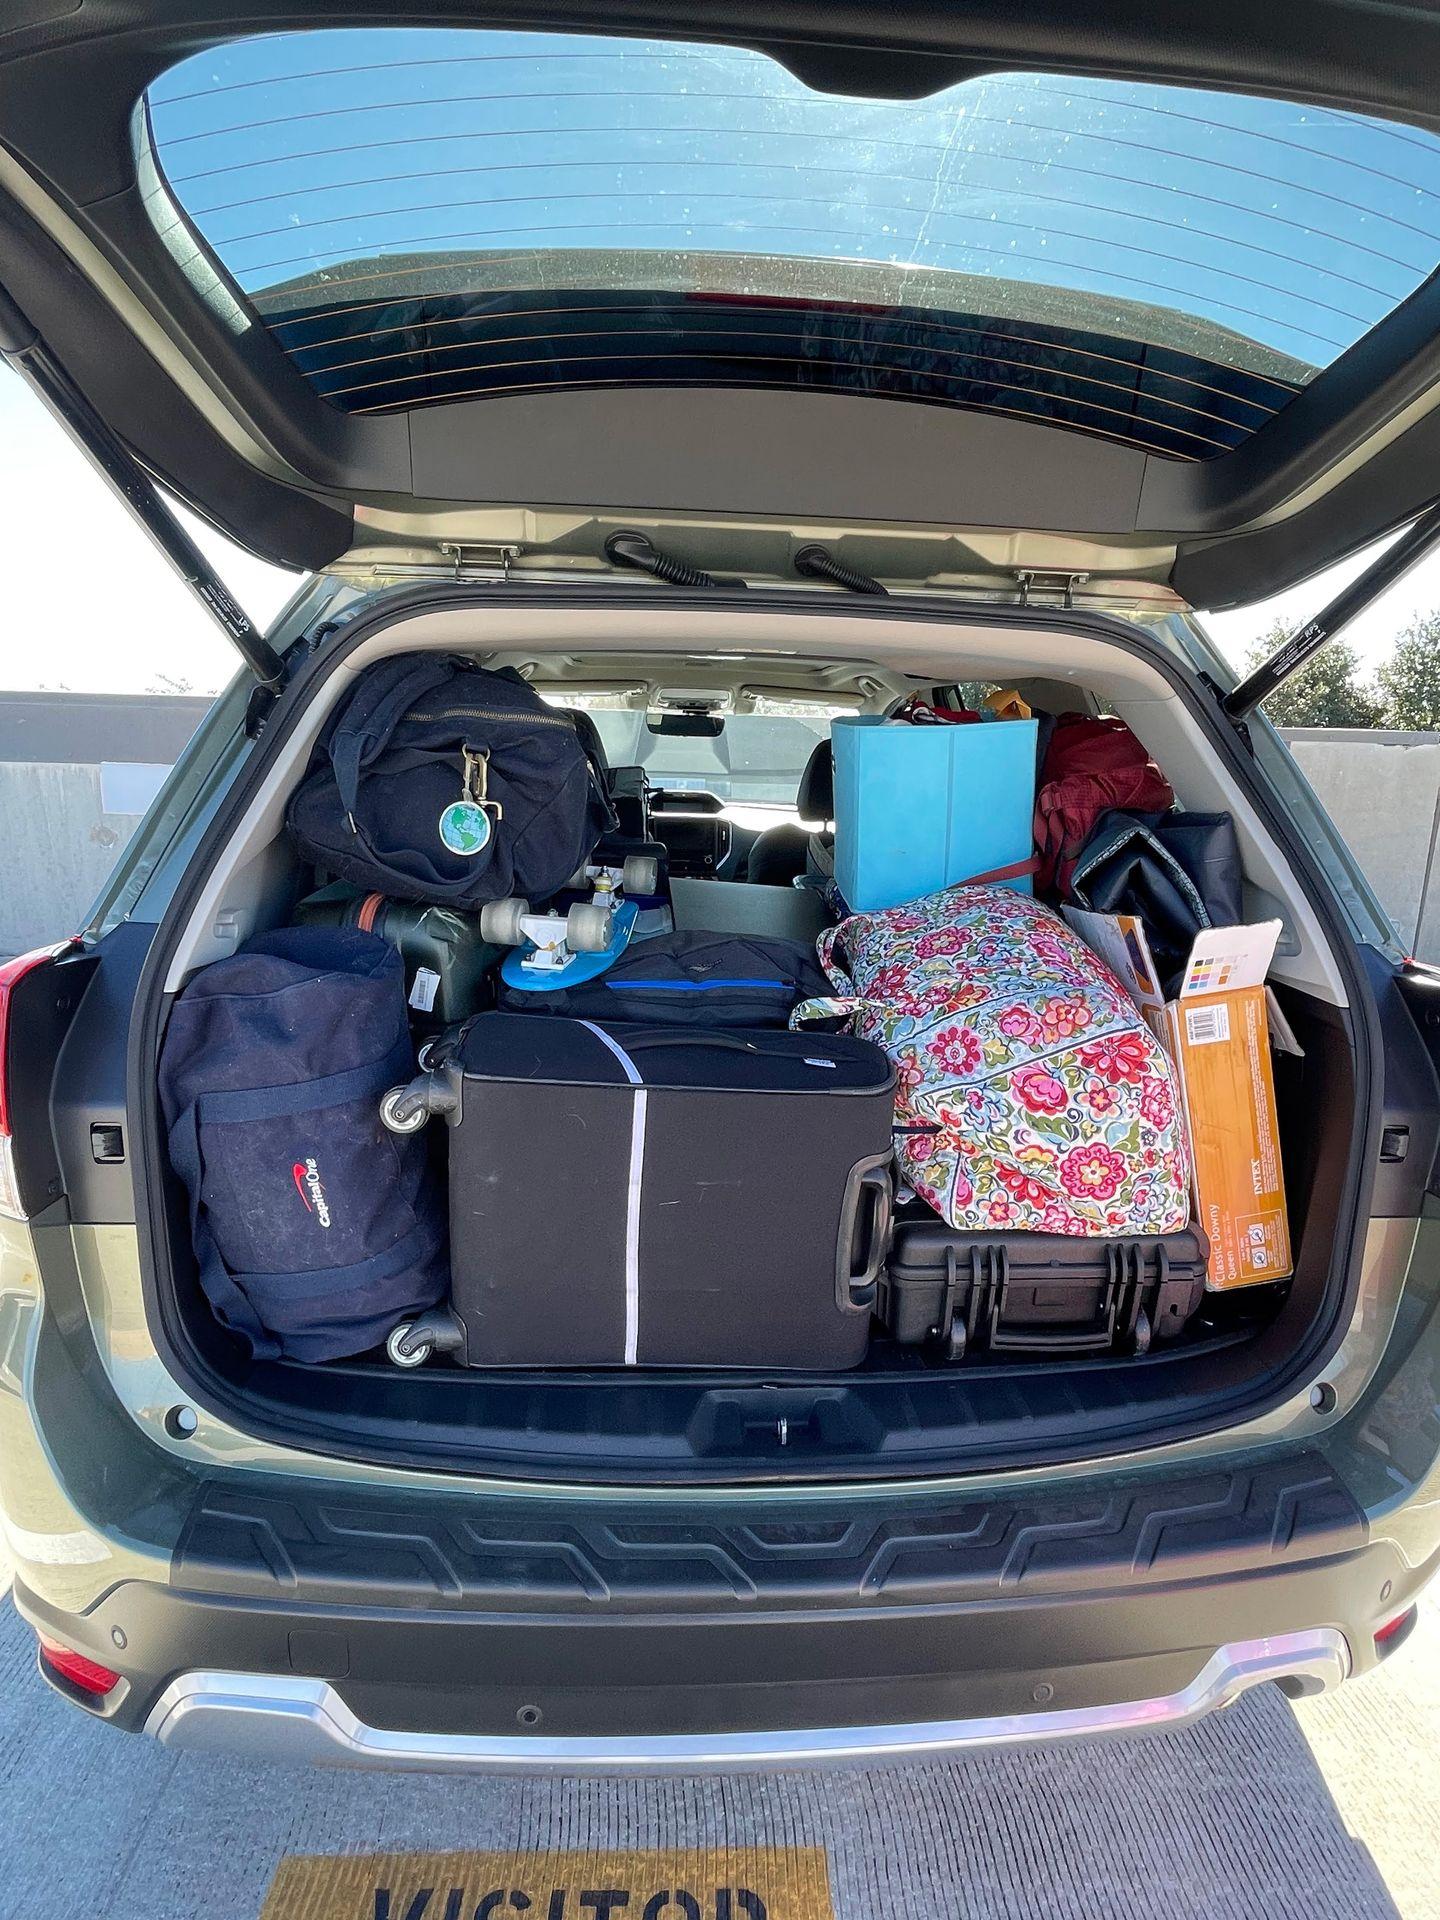 A look into the back of our Subaru, full of suitcases, duffle bags and boxes.